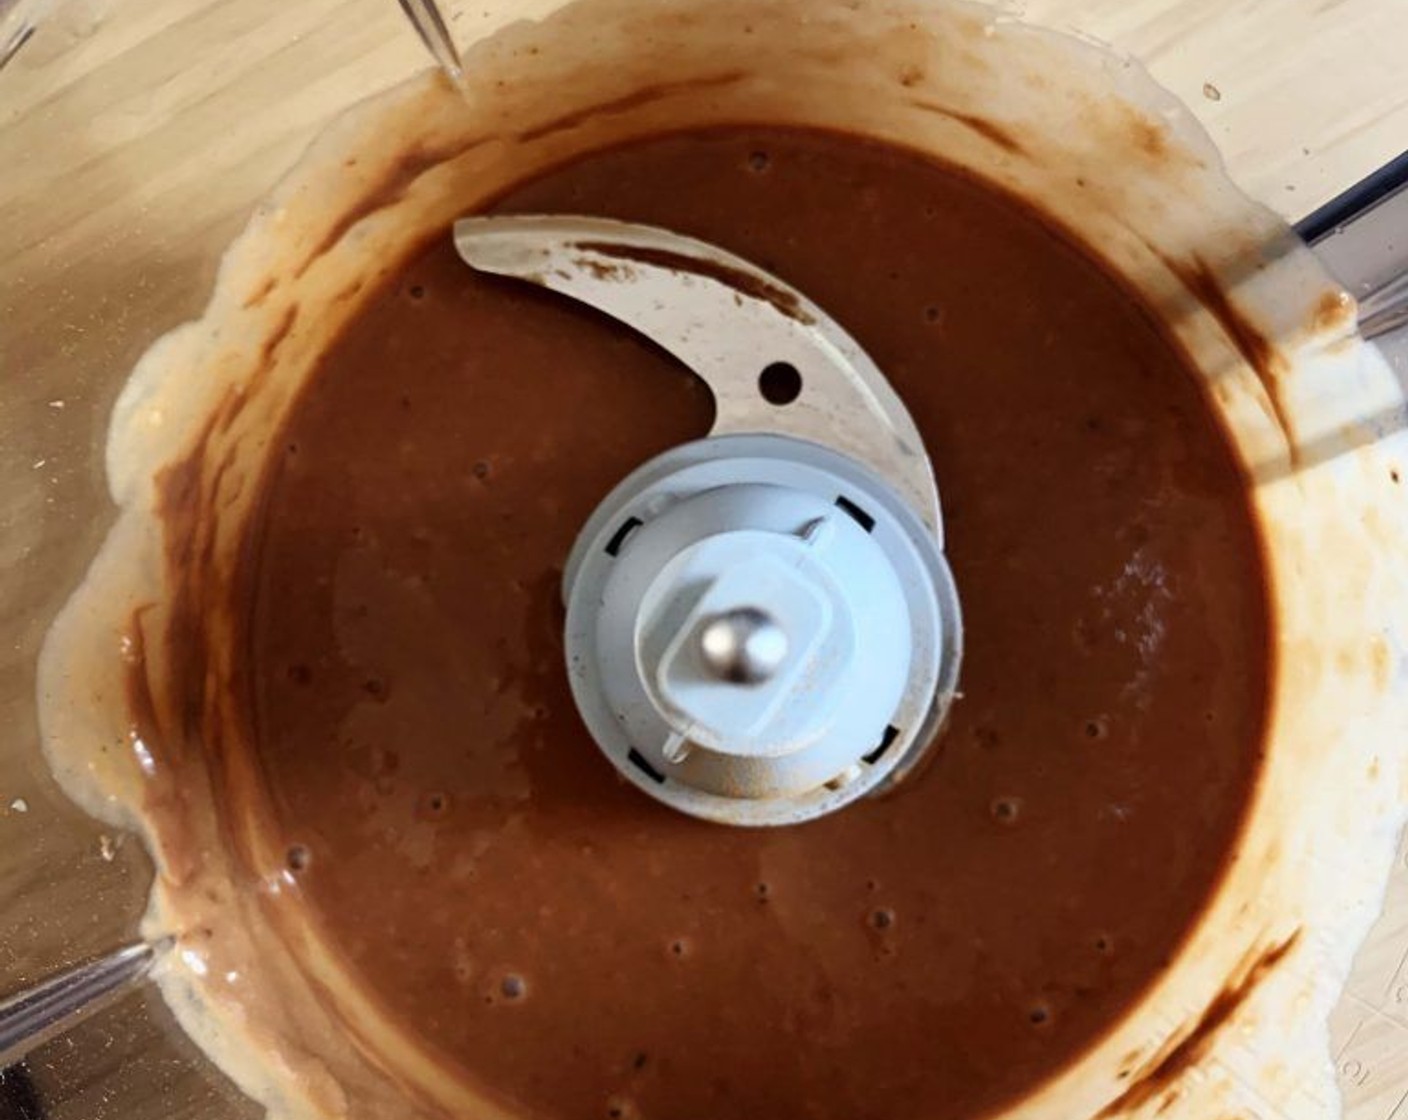 step 2 Place the Banana (1 cup), Chocolate Hazelnut Spread (3 Tbsp), Protein Powder (1 scoop), Ground Cinnamon (1 dash), Pink Himalayan Sea Salt (1 pinch) and Coconut Oil (1 tsp) into a food processor and blend until a smooth paste form